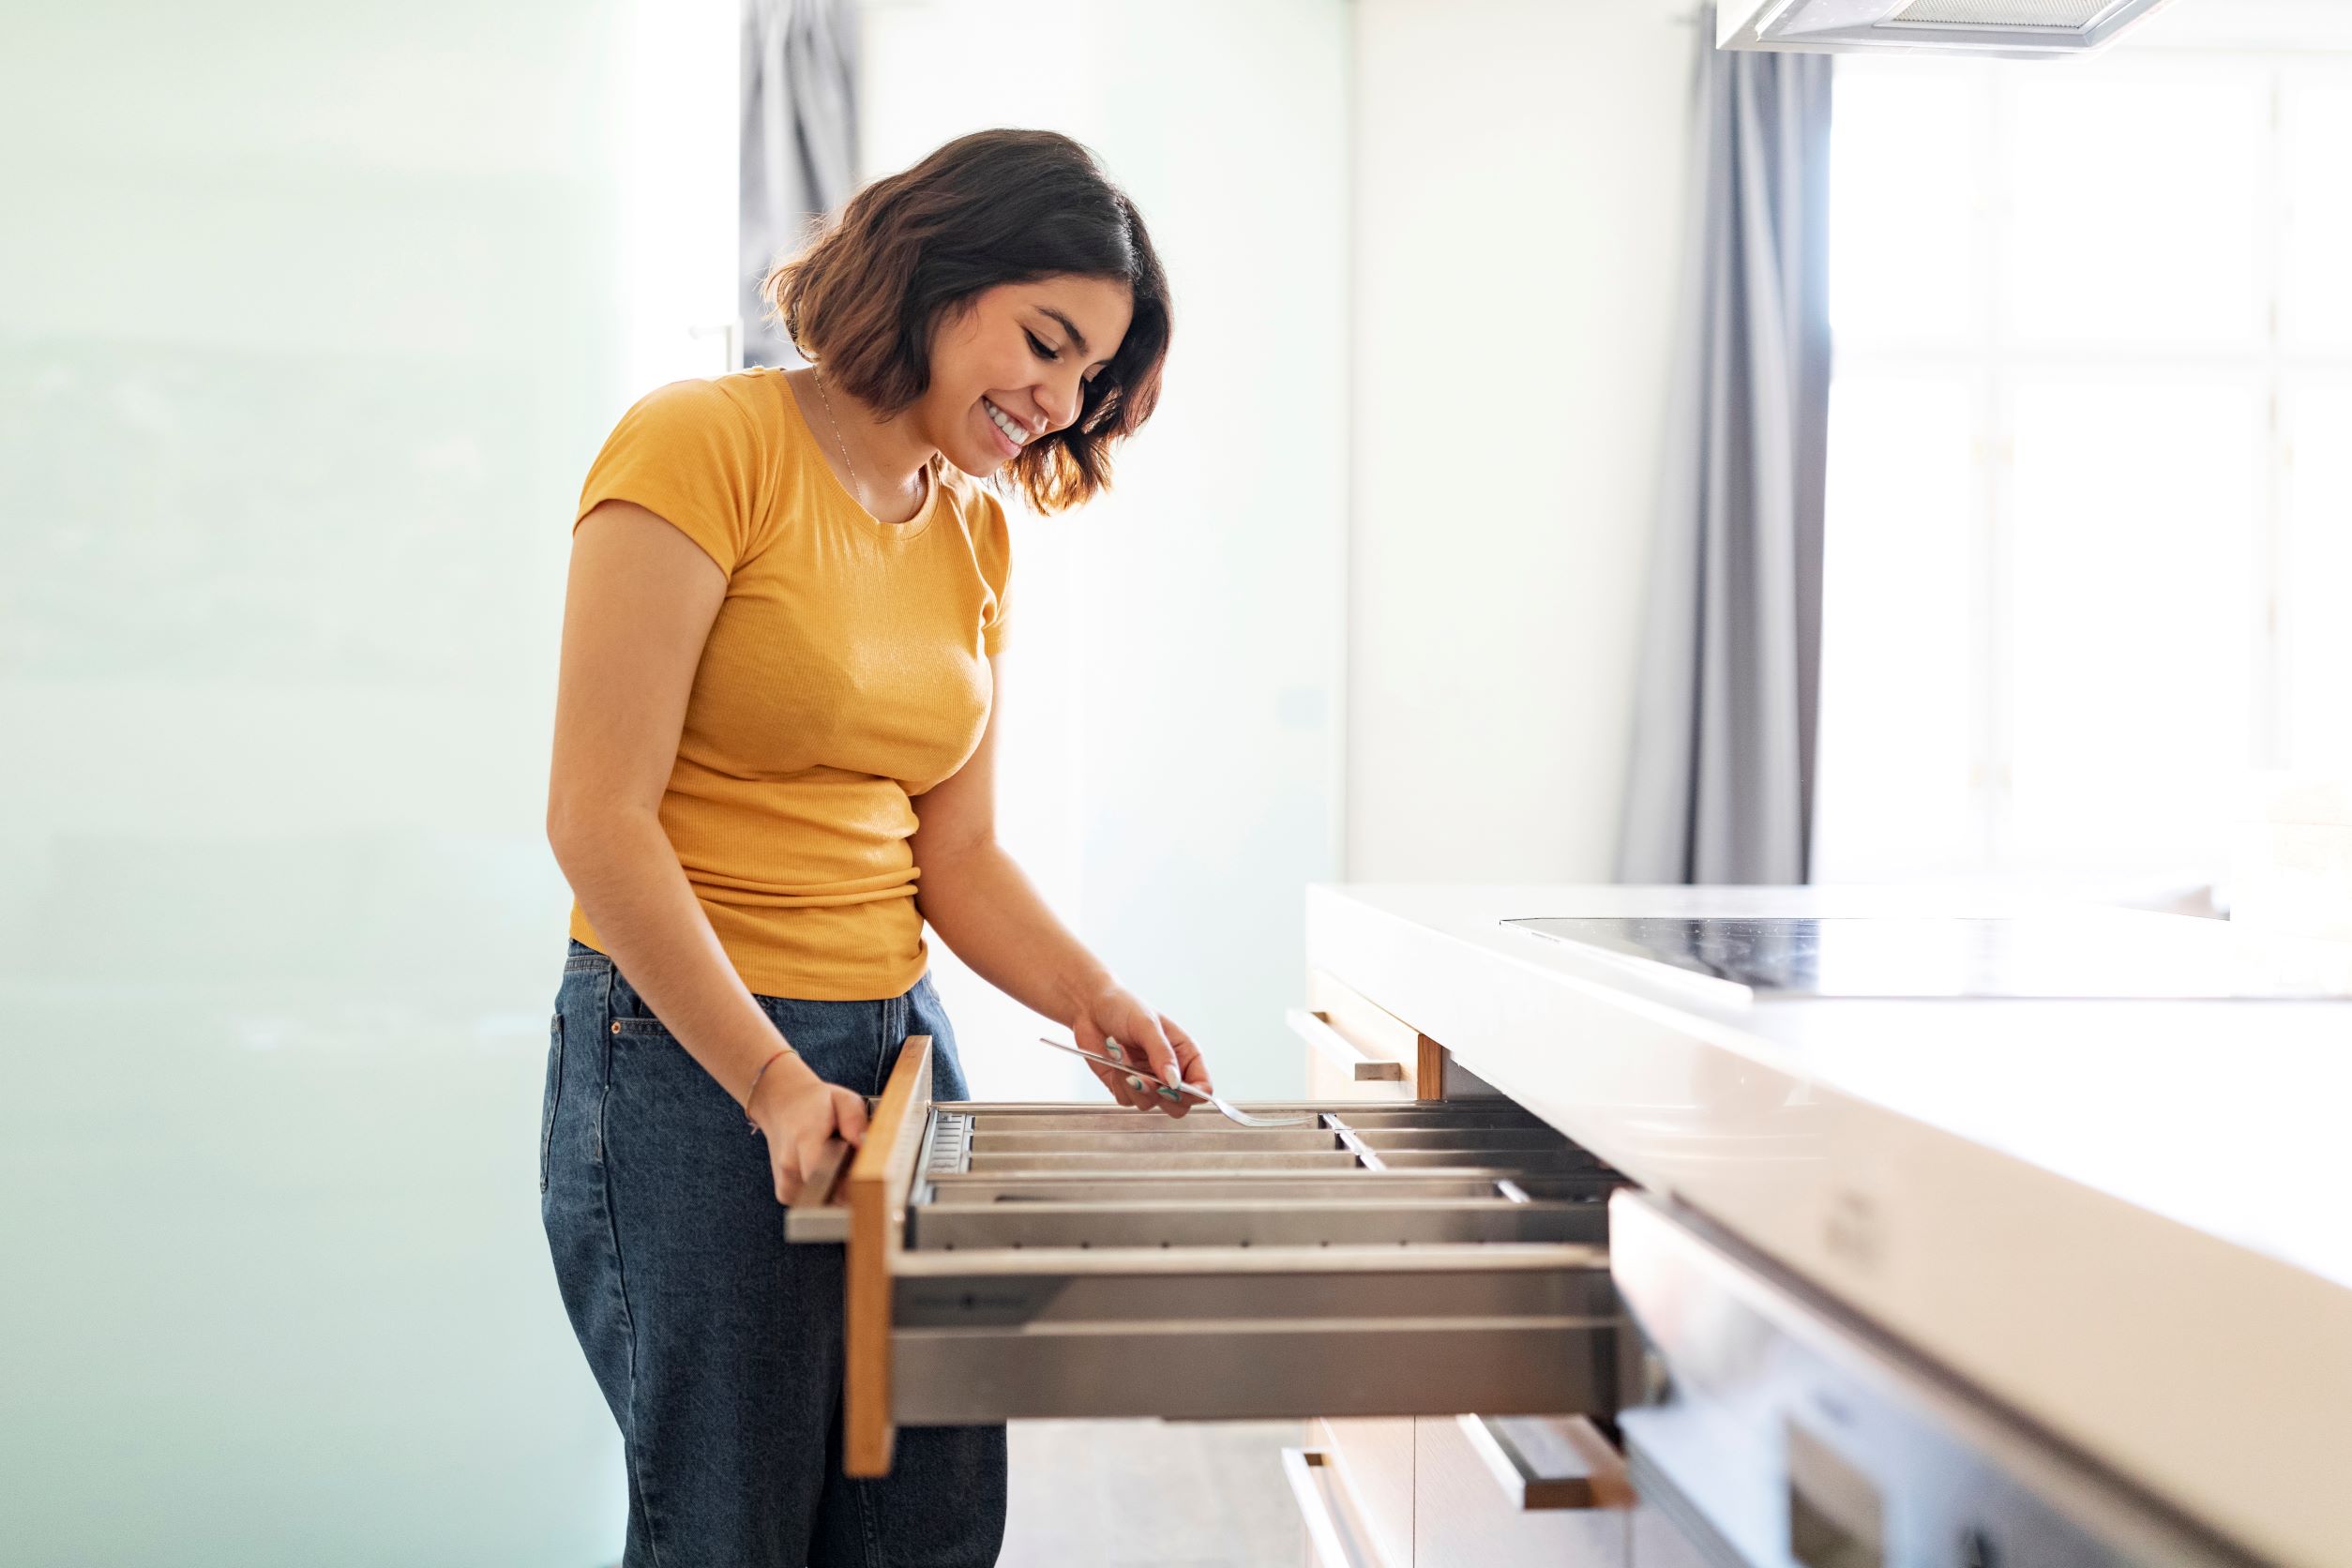 Young women opening a cabinet drawer and grabbing a utensil. One of the key benefits of cabinet drawers is their ability to maximize storage space